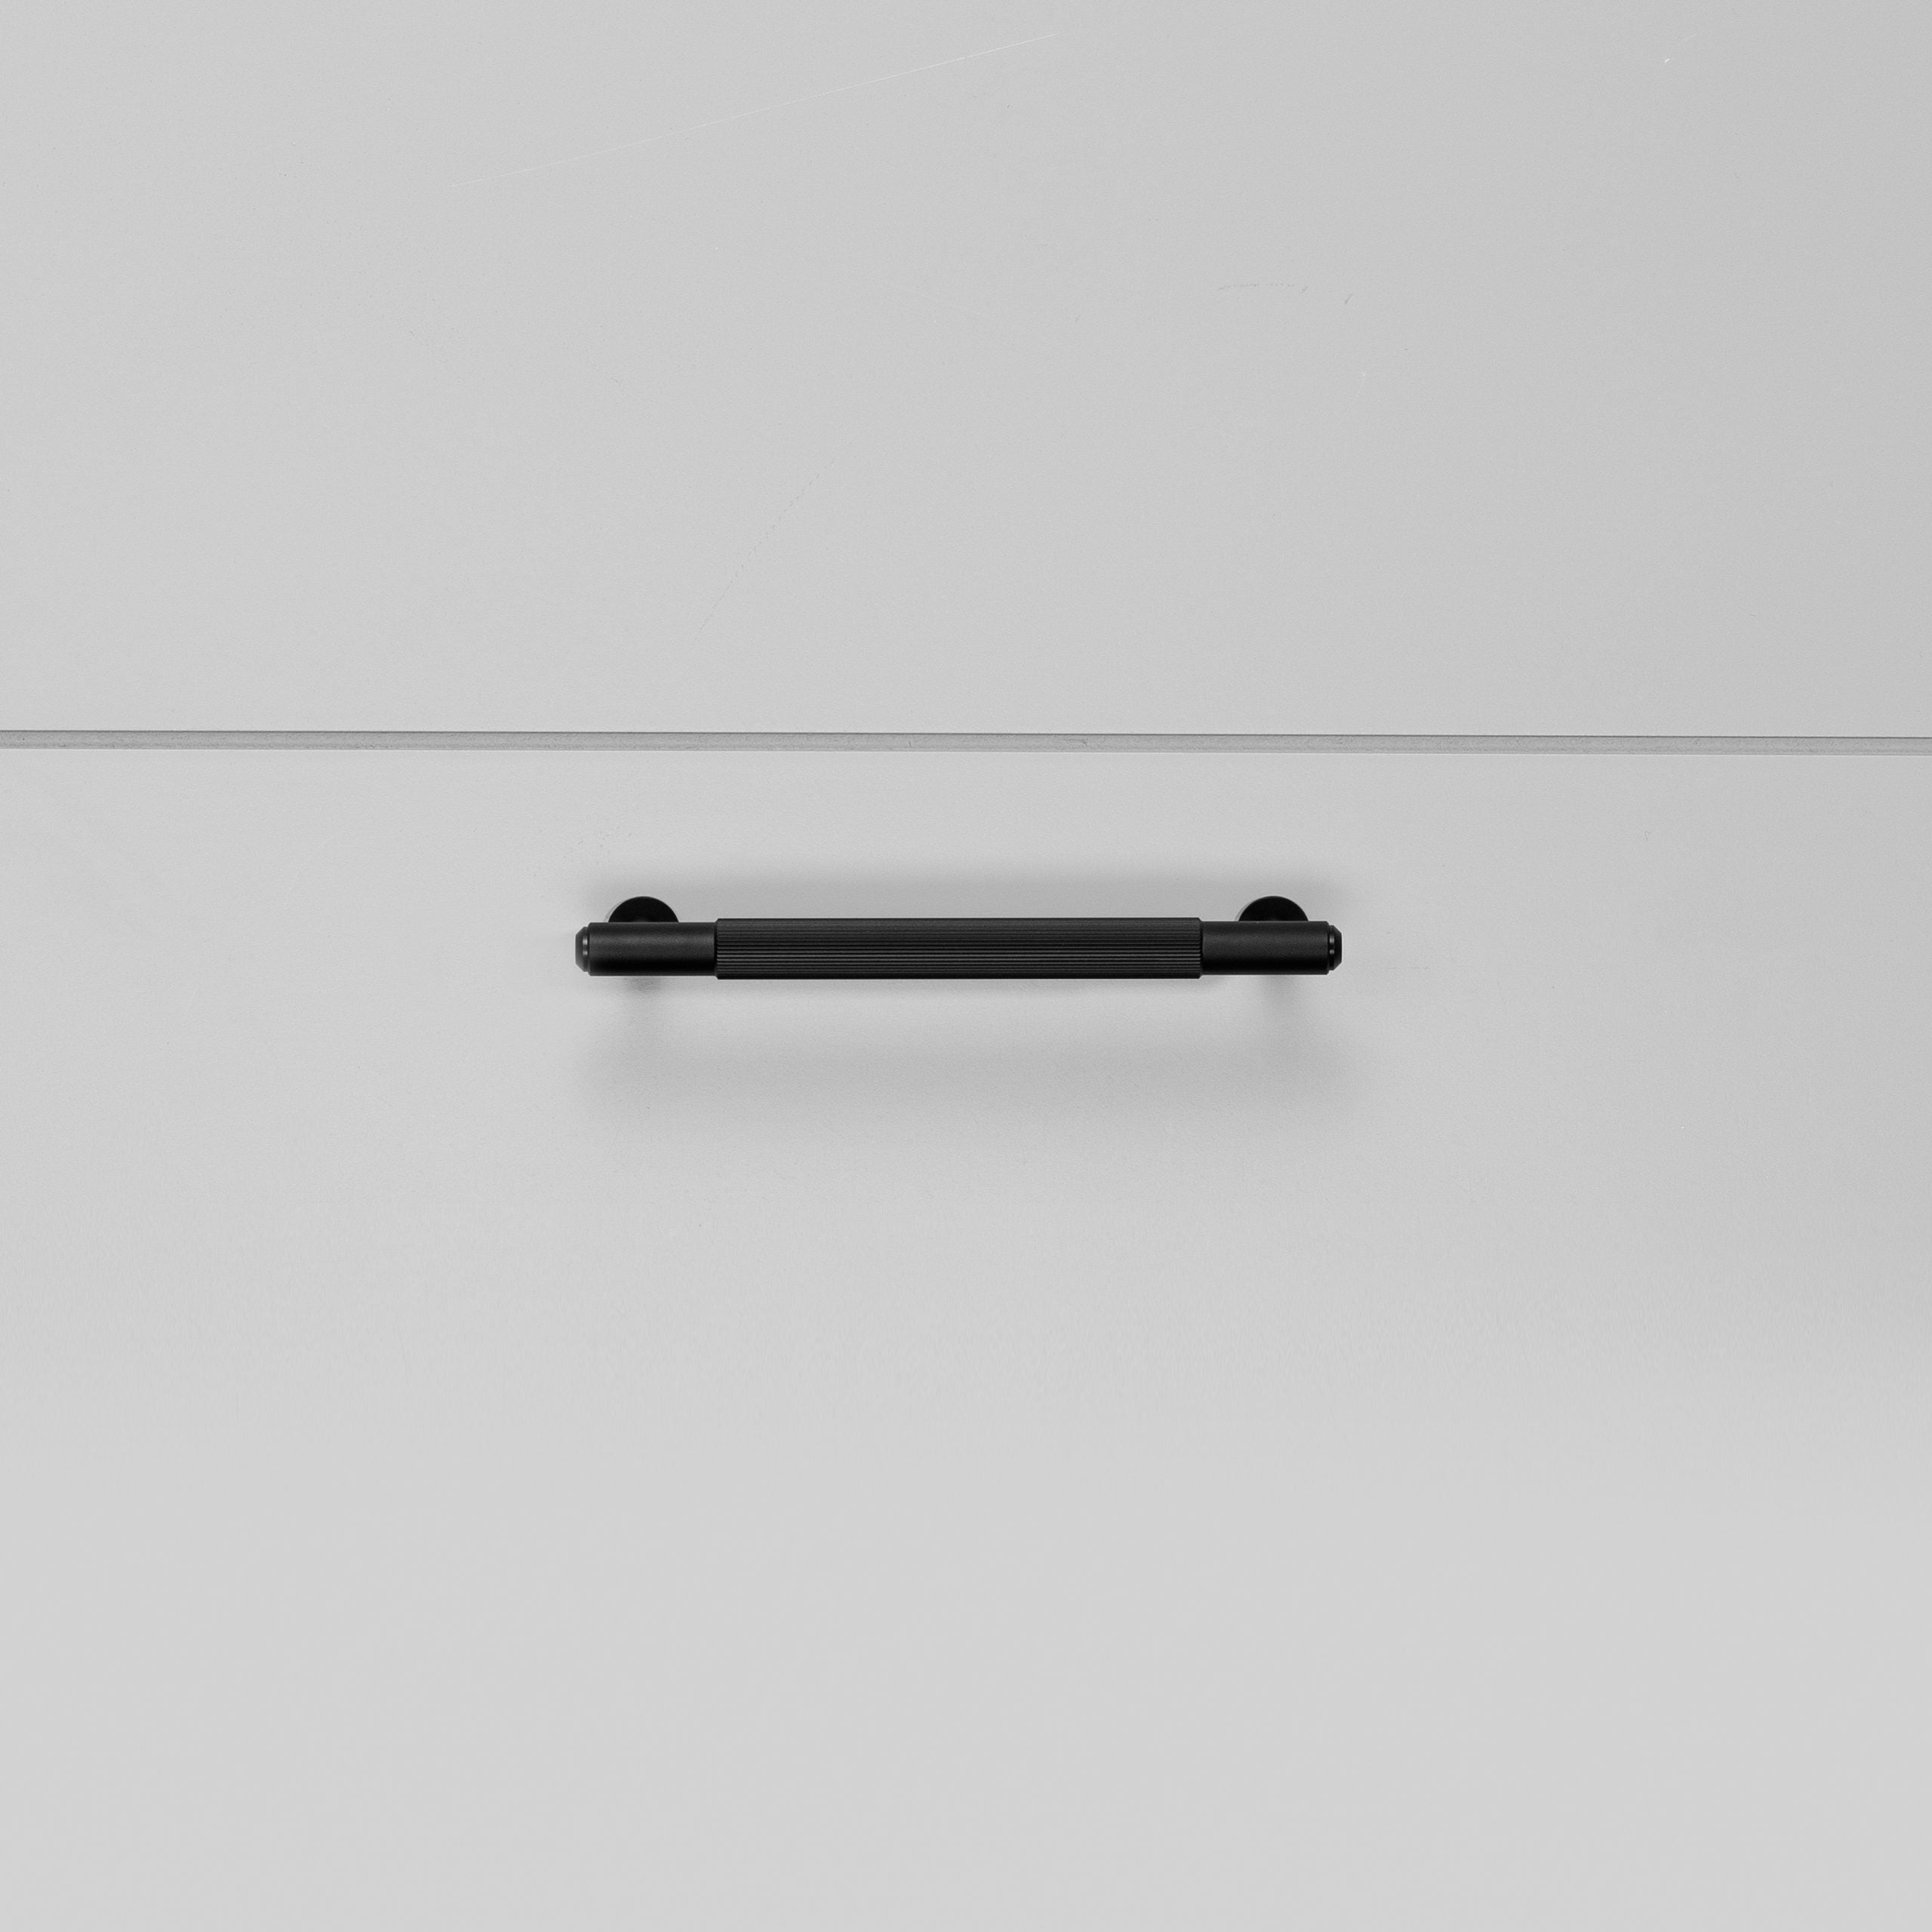 Buster + Punch Pull Bar, Linear Design Hardware Buster + Punch Black 0.2x0.09x0.03 